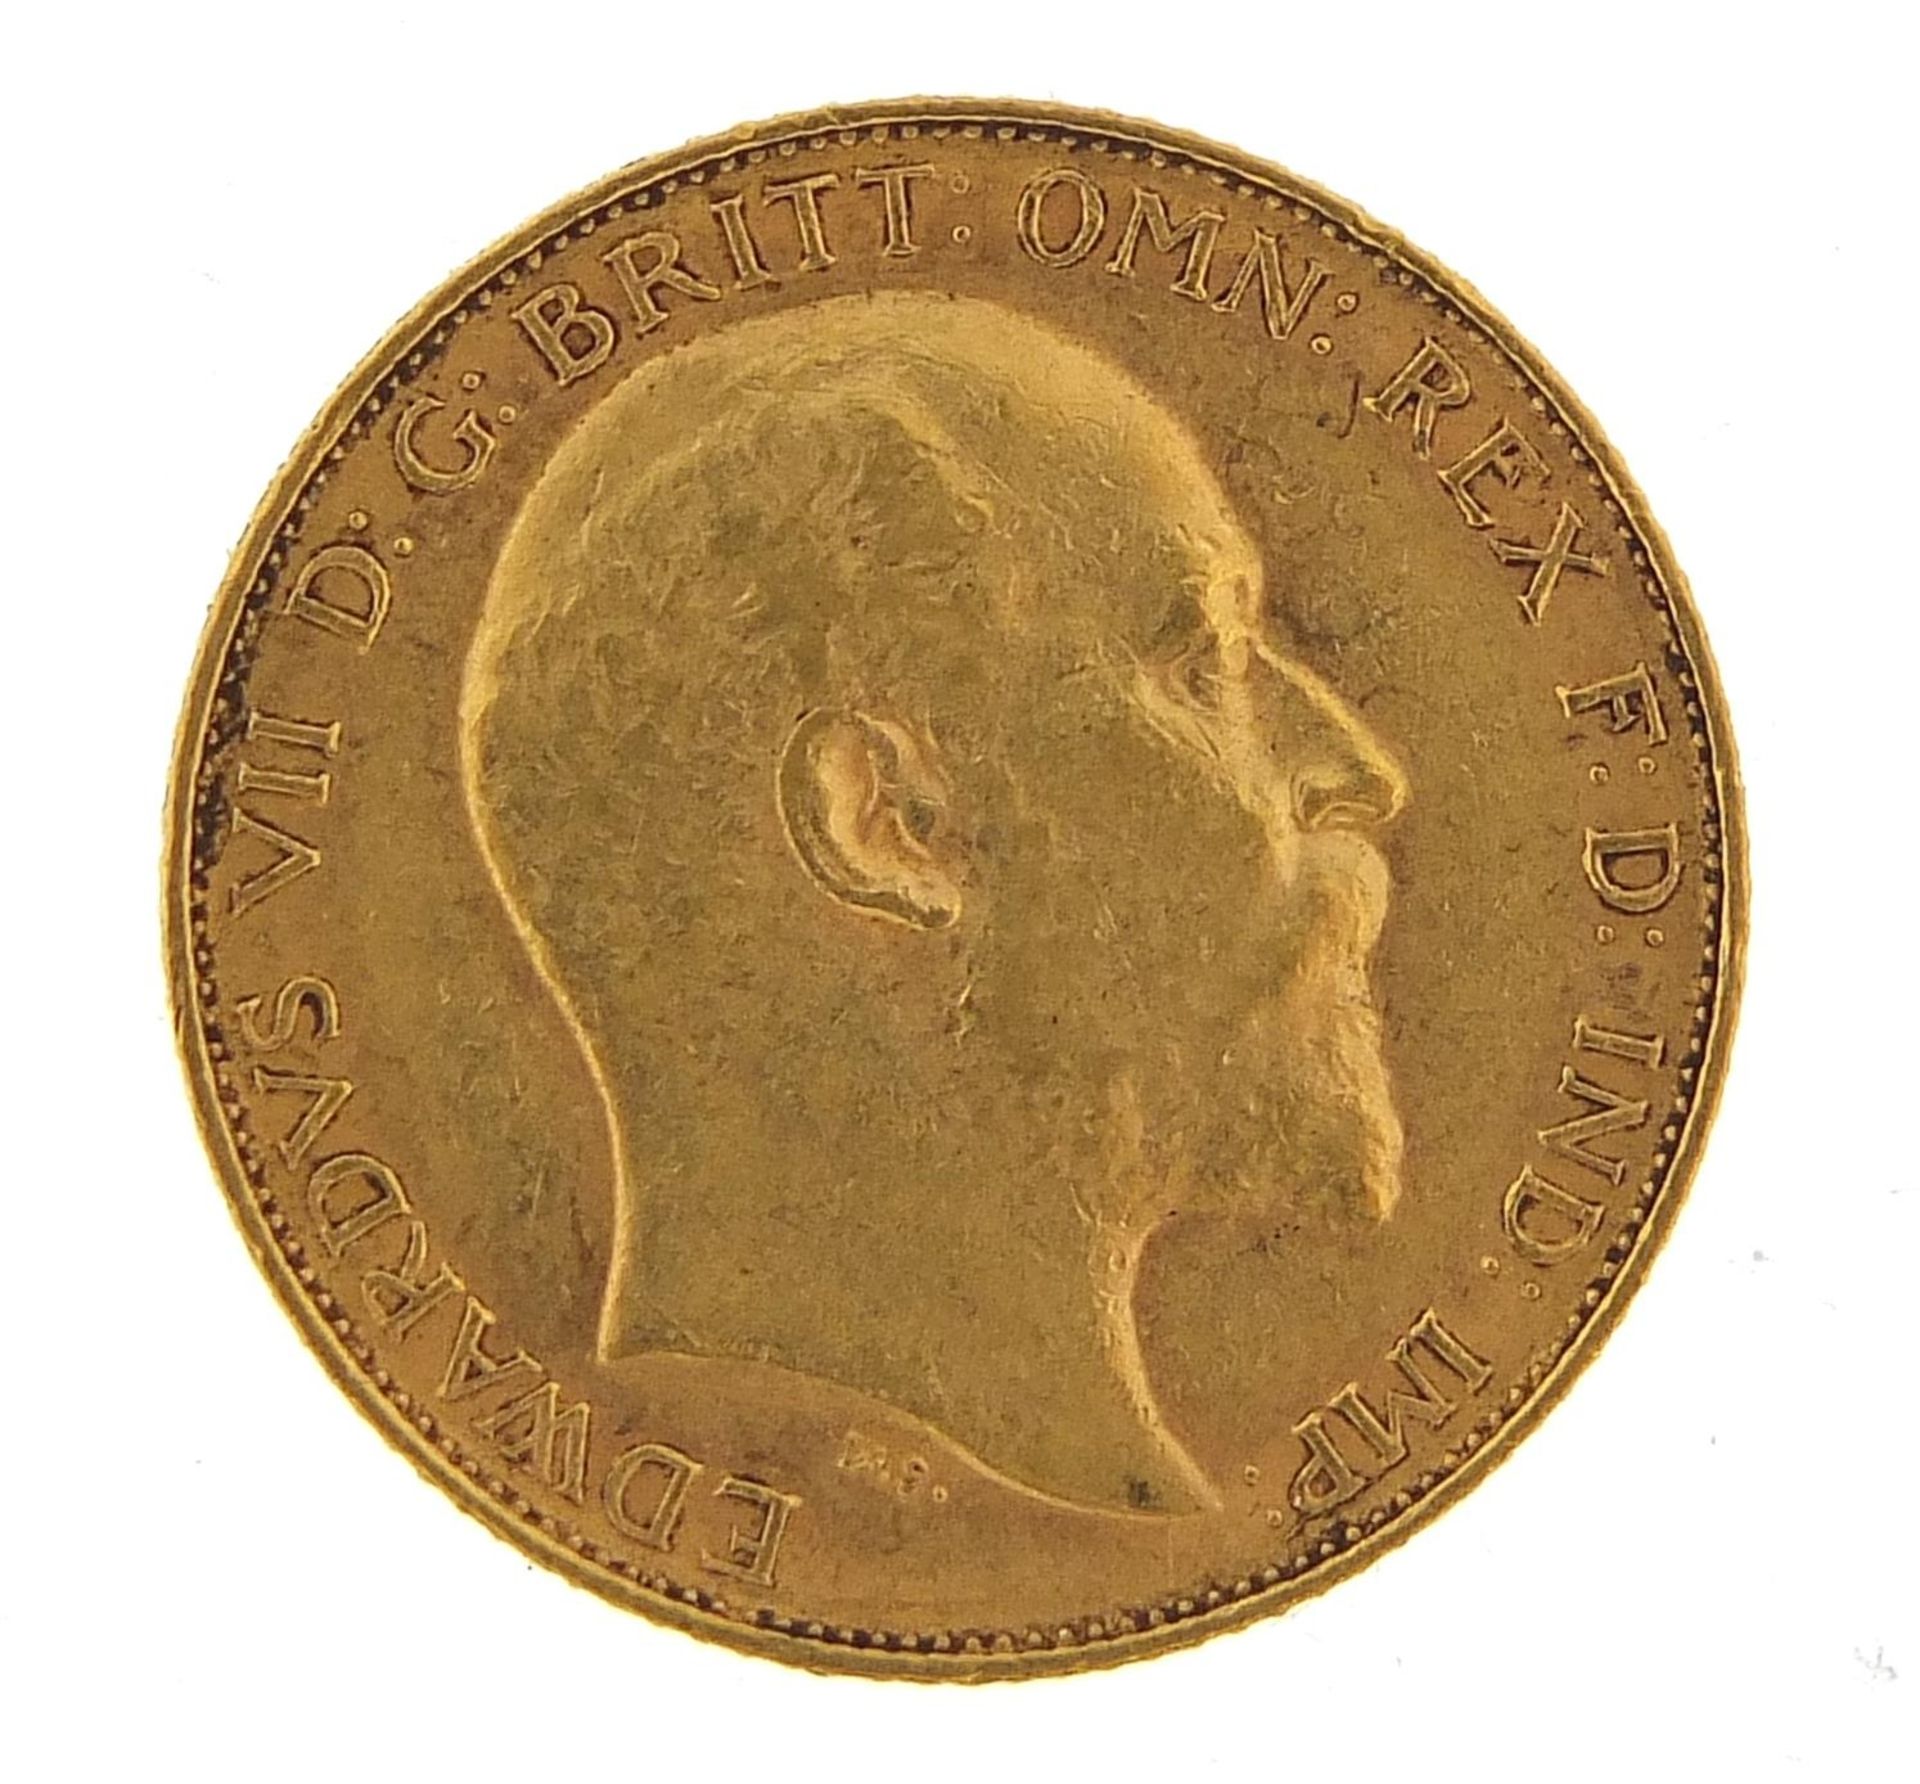 Edward VII 1902 gold half sovereign - this lot is sold without buyer?s premium, the hammer price - Image 2 of 3